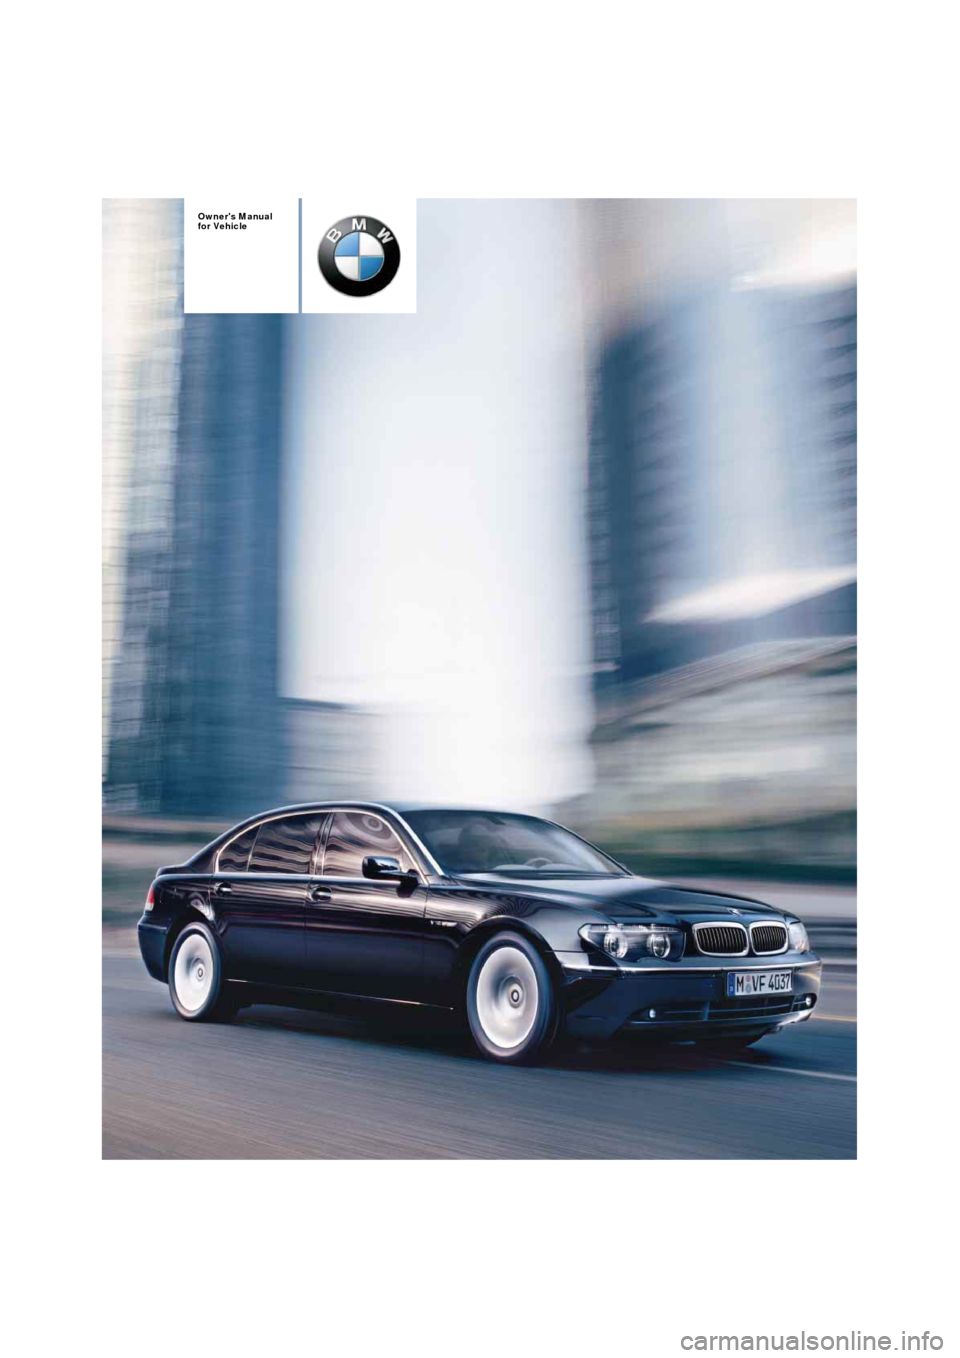 BMW 760Li 2004 E66 Owners Manual  
Owners Manual
for Vehicle 